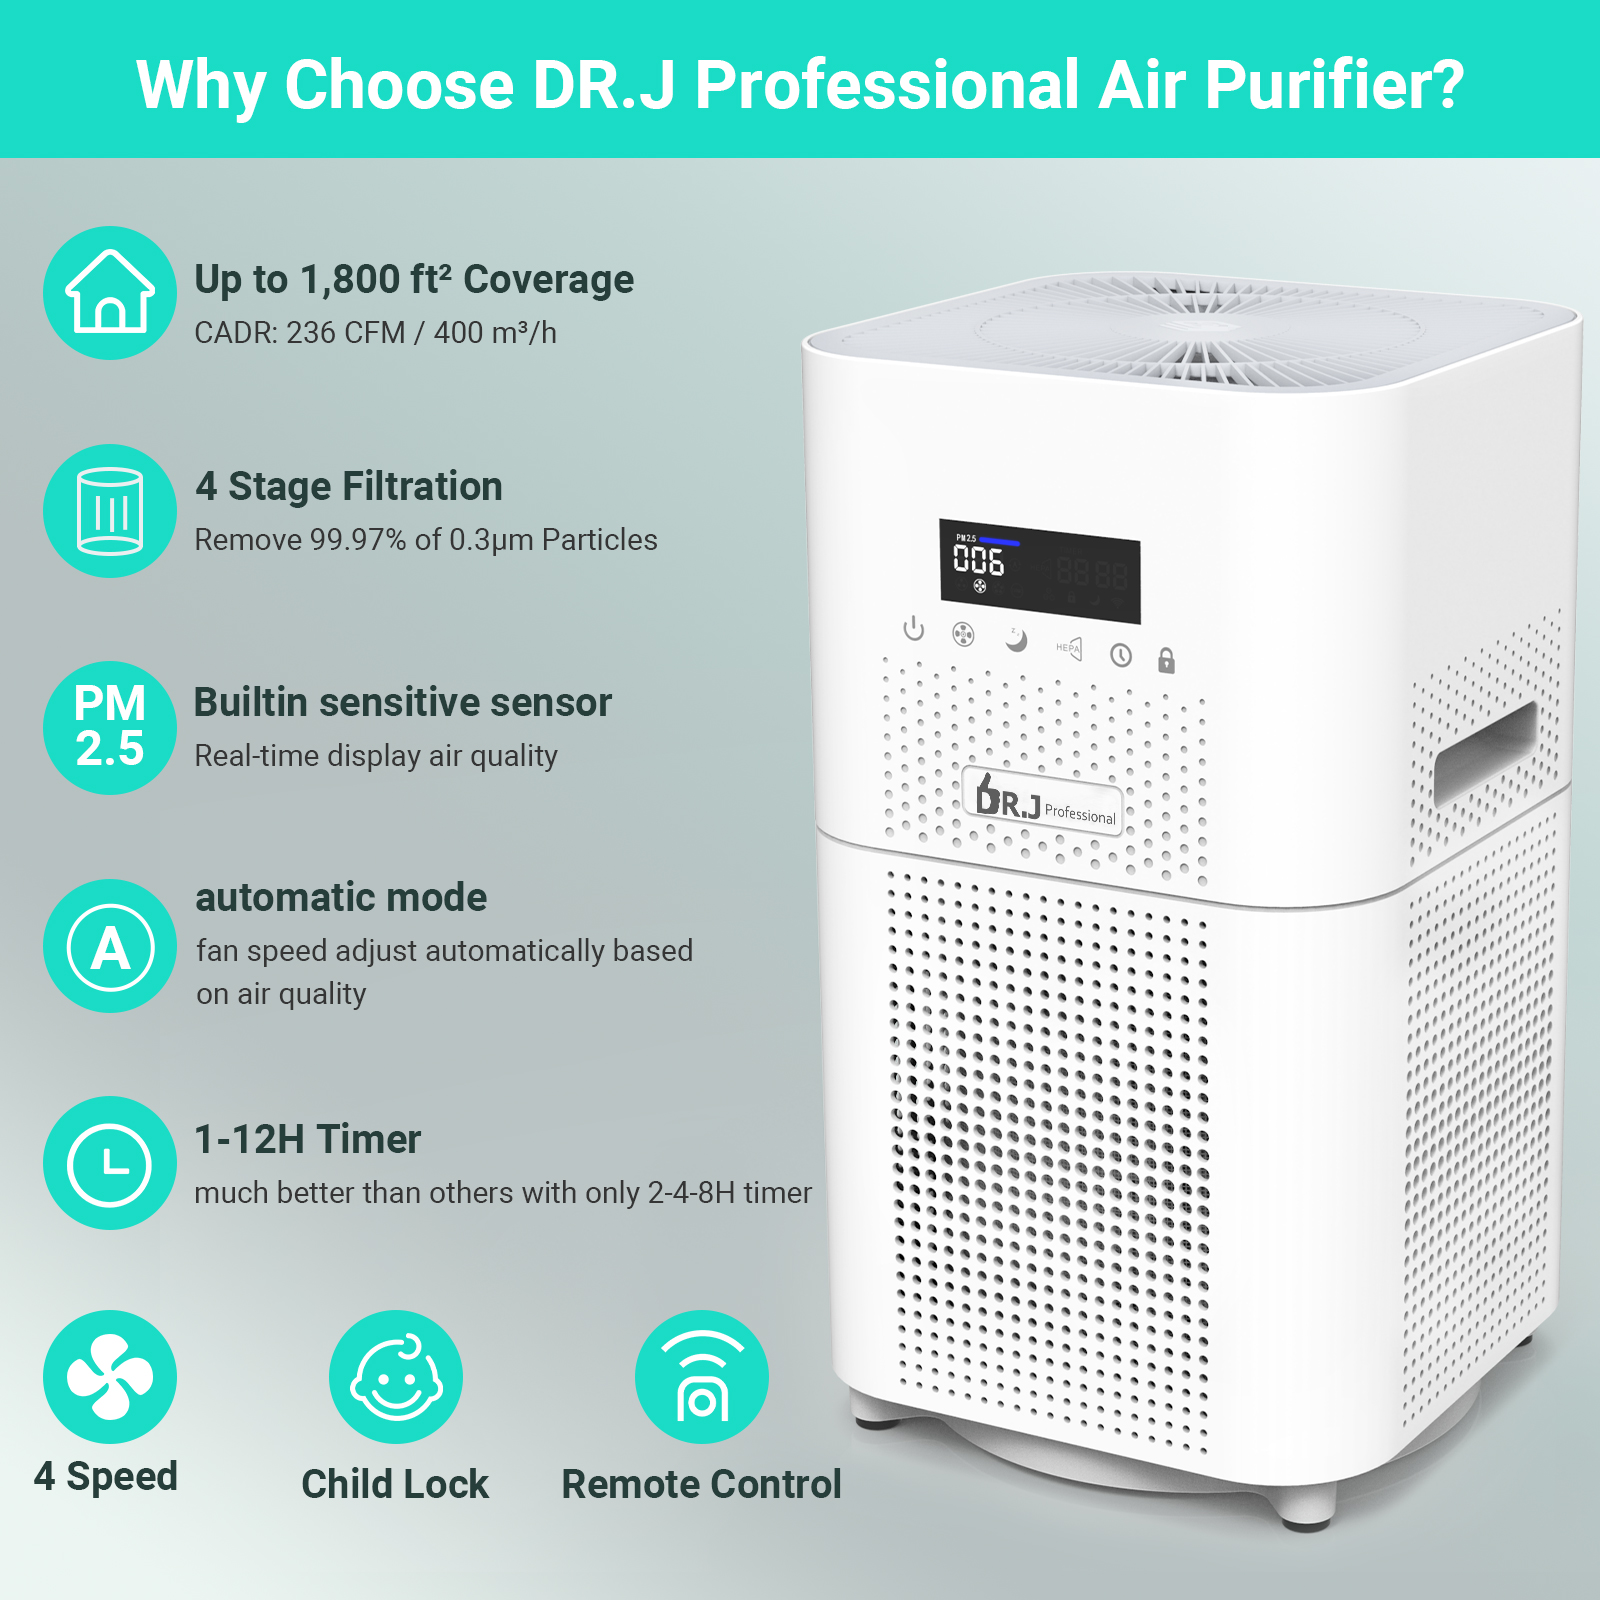 DR.J Professional Air Purifier for Home Large Room, 1800 sq. ft, H13 True HEPA Filter, 4-Stage Auto Mode 12H Timer - image 3 of 10